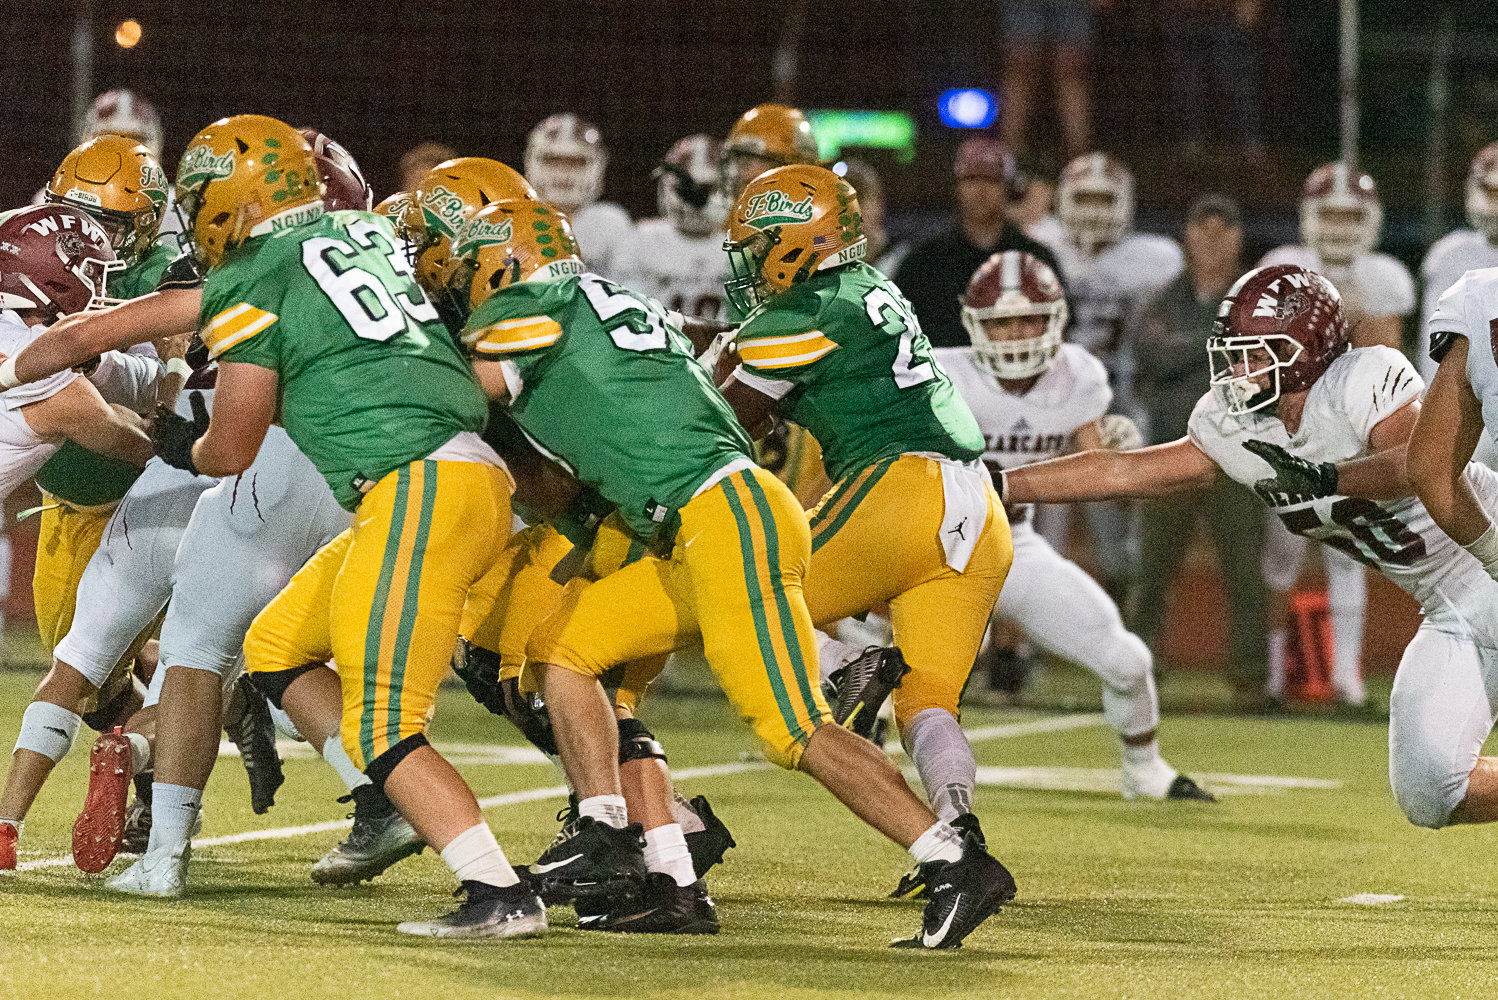 Carlos Matheney follows a line of blockers during Tumwater's 28-7 loss to W.F. West on Sept. 30.